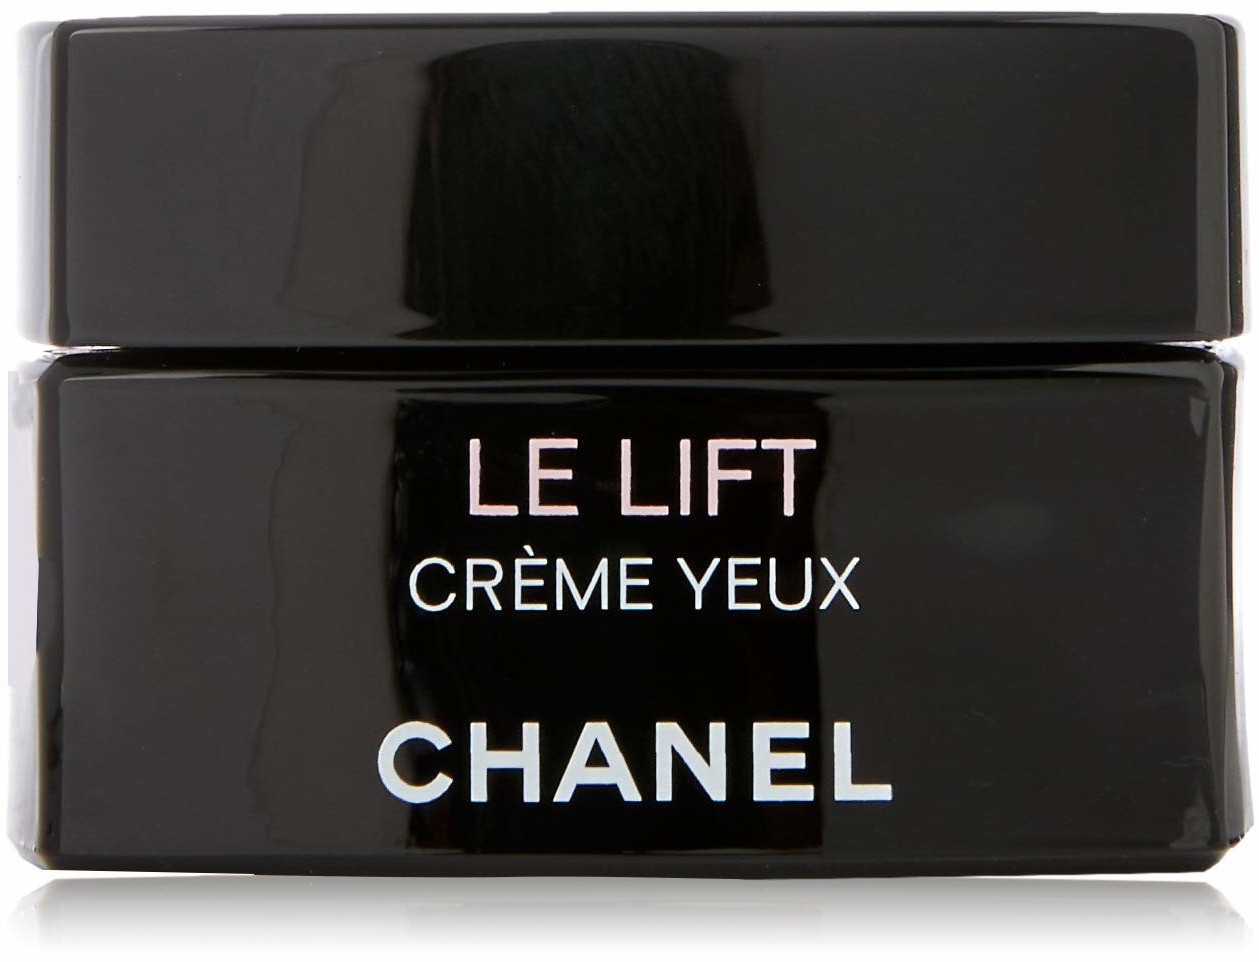 LE LIFT crème yeux Anti-ageing and firming Chanel - Perfumes Club